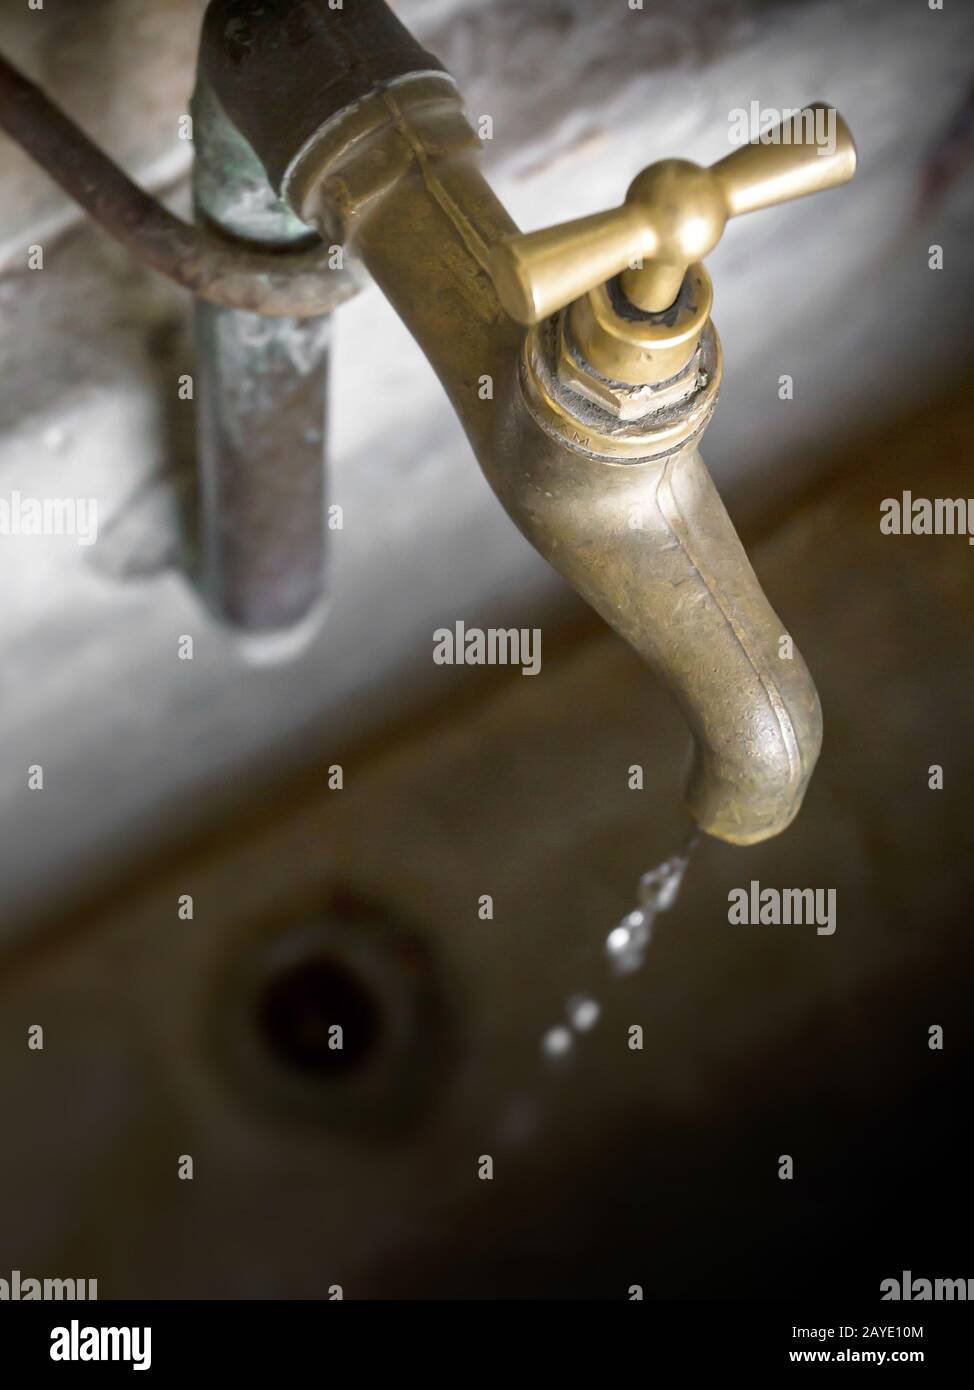 Old leaky dripping faucet Stock Photo